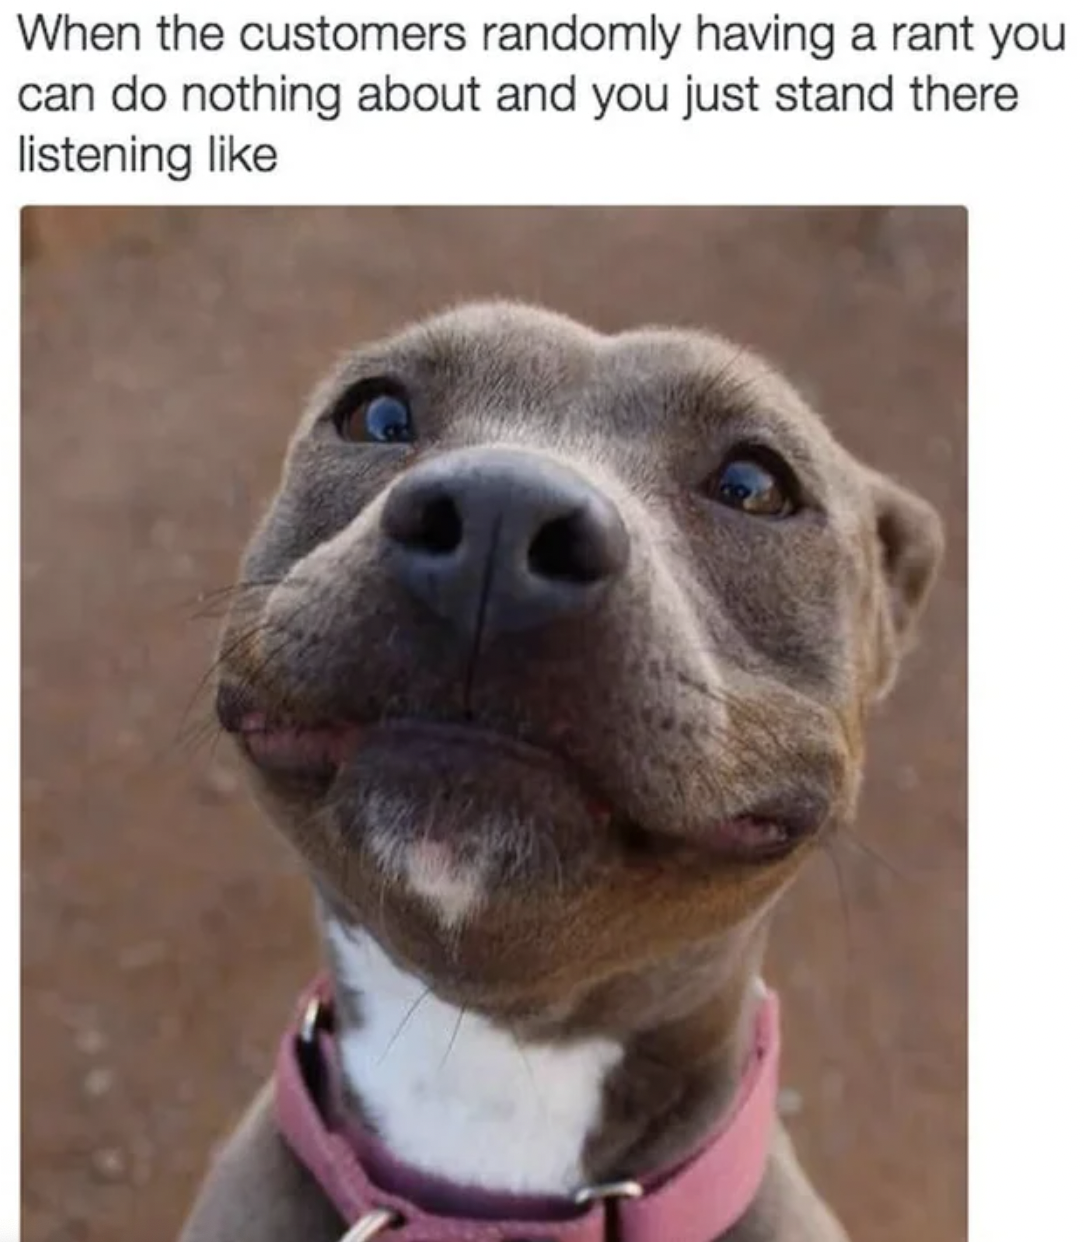 Work memes - snout - When the customers randomly having a rant you can do nothing about and you just stand there listening